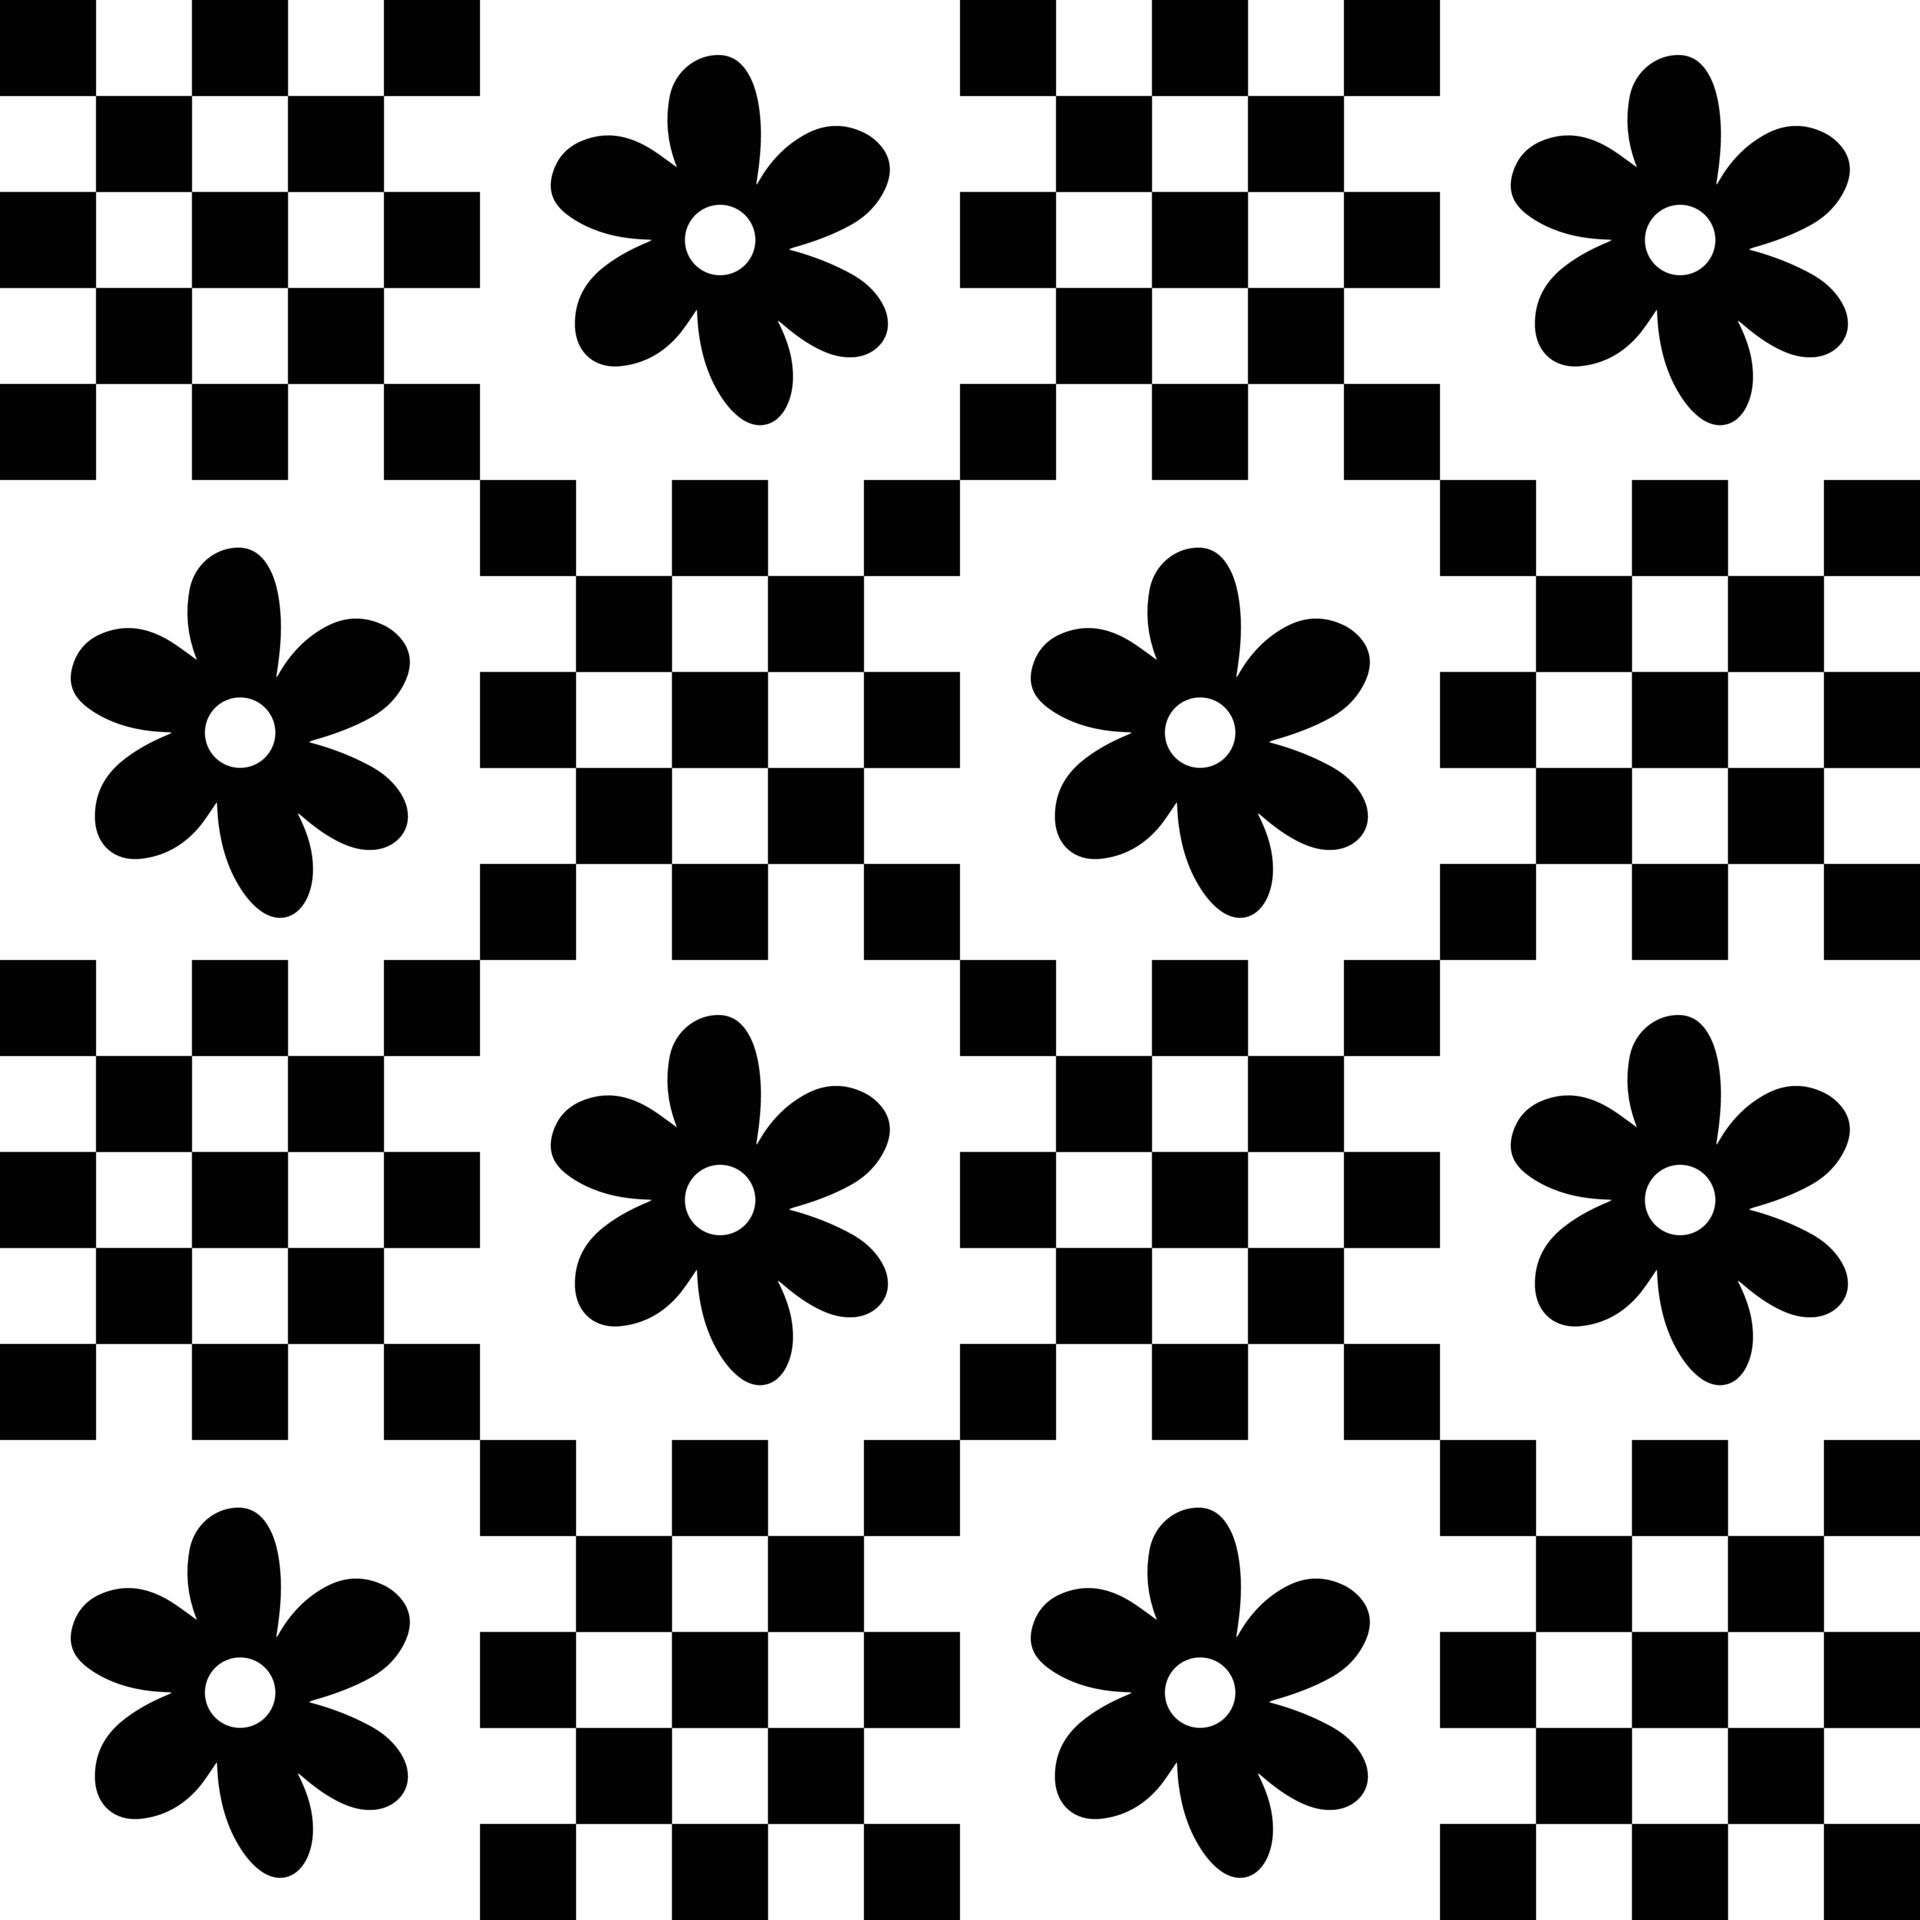 Black and white squares with black flowers on a white background - Black and white, cute white